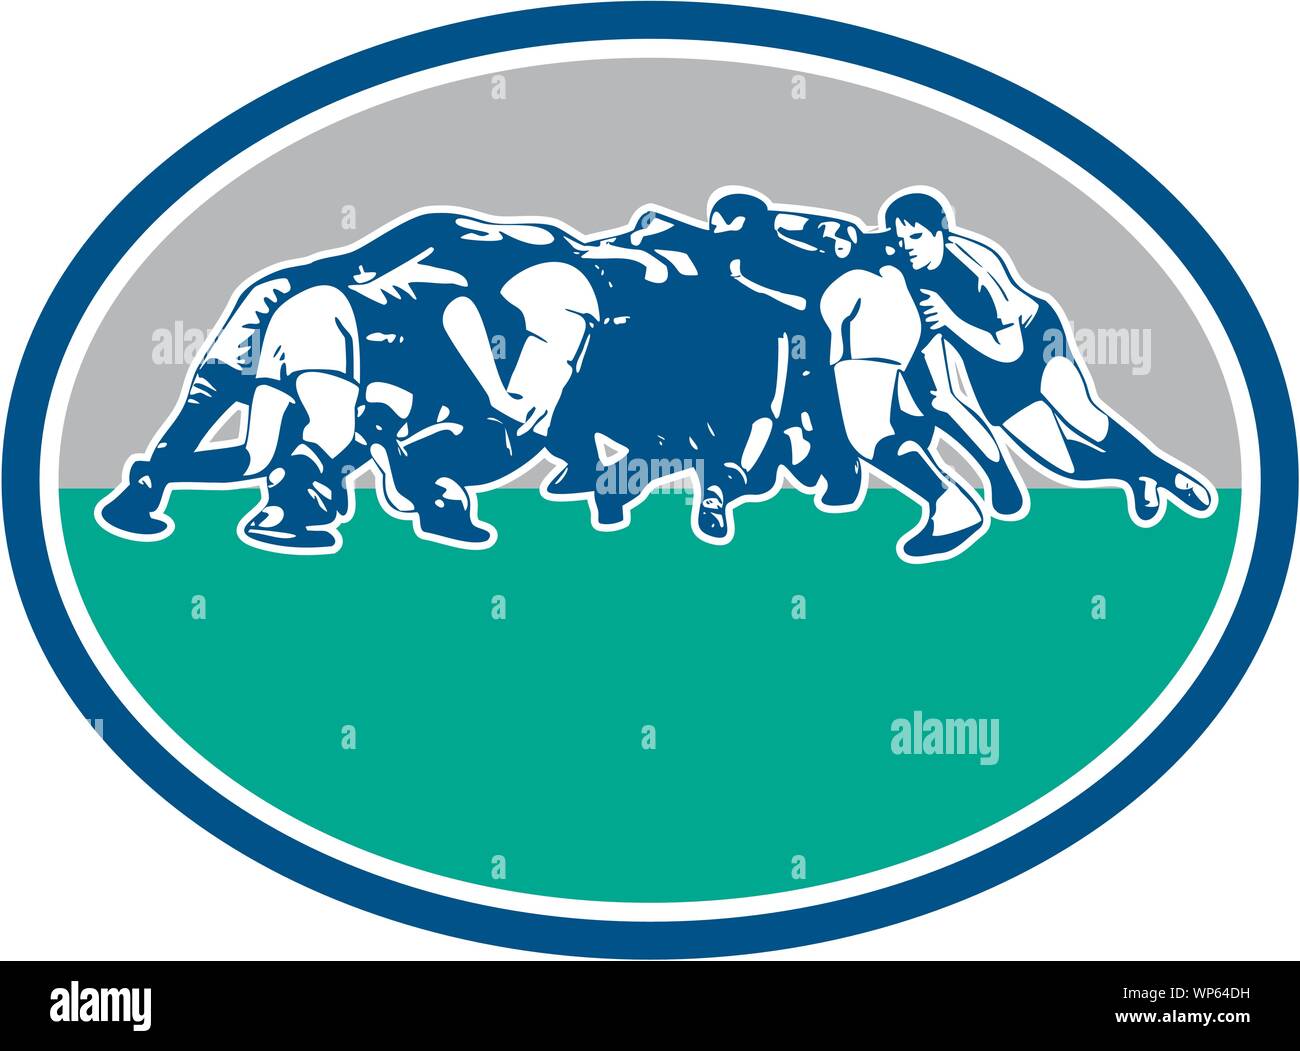 Rugby Union Scrum Oval Retro Stock Vector